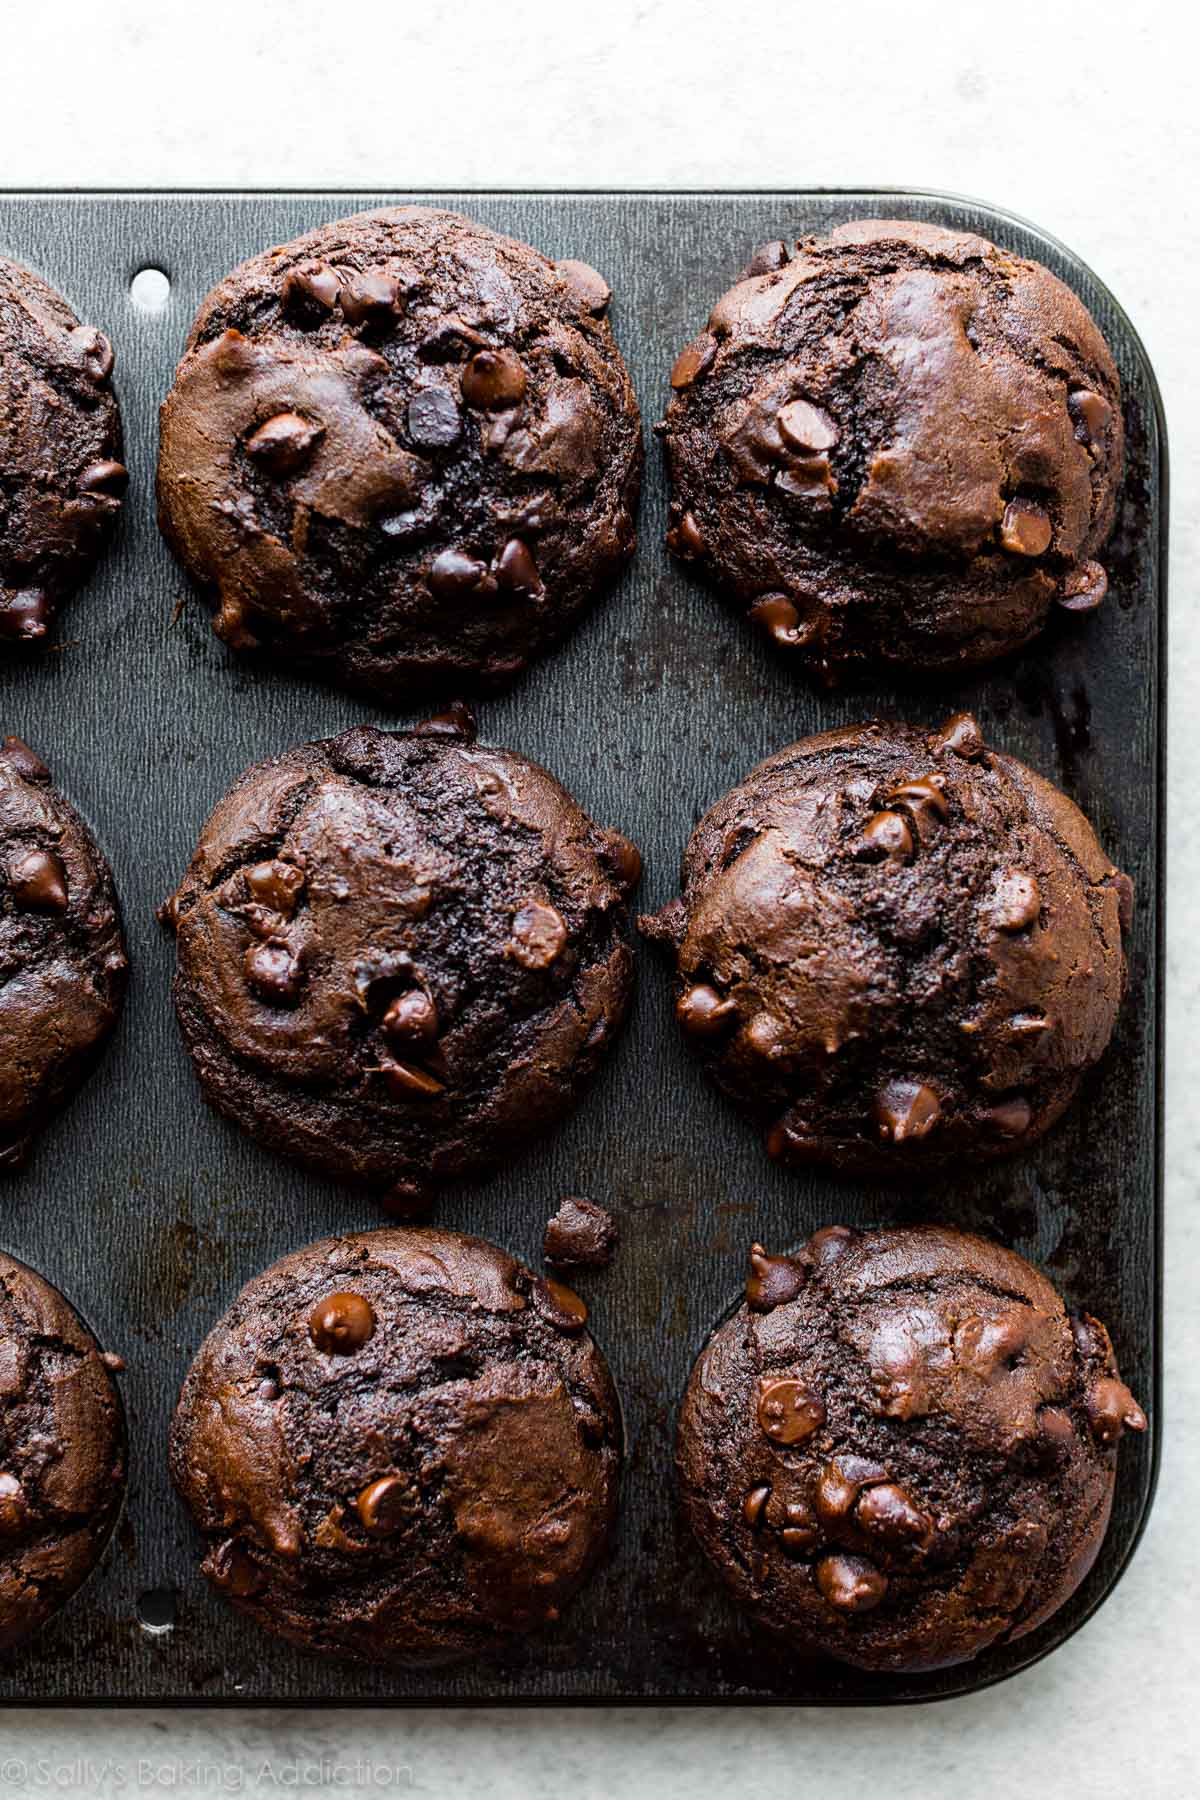 A baking tray of double-chocolate muffins with chocolate chips.